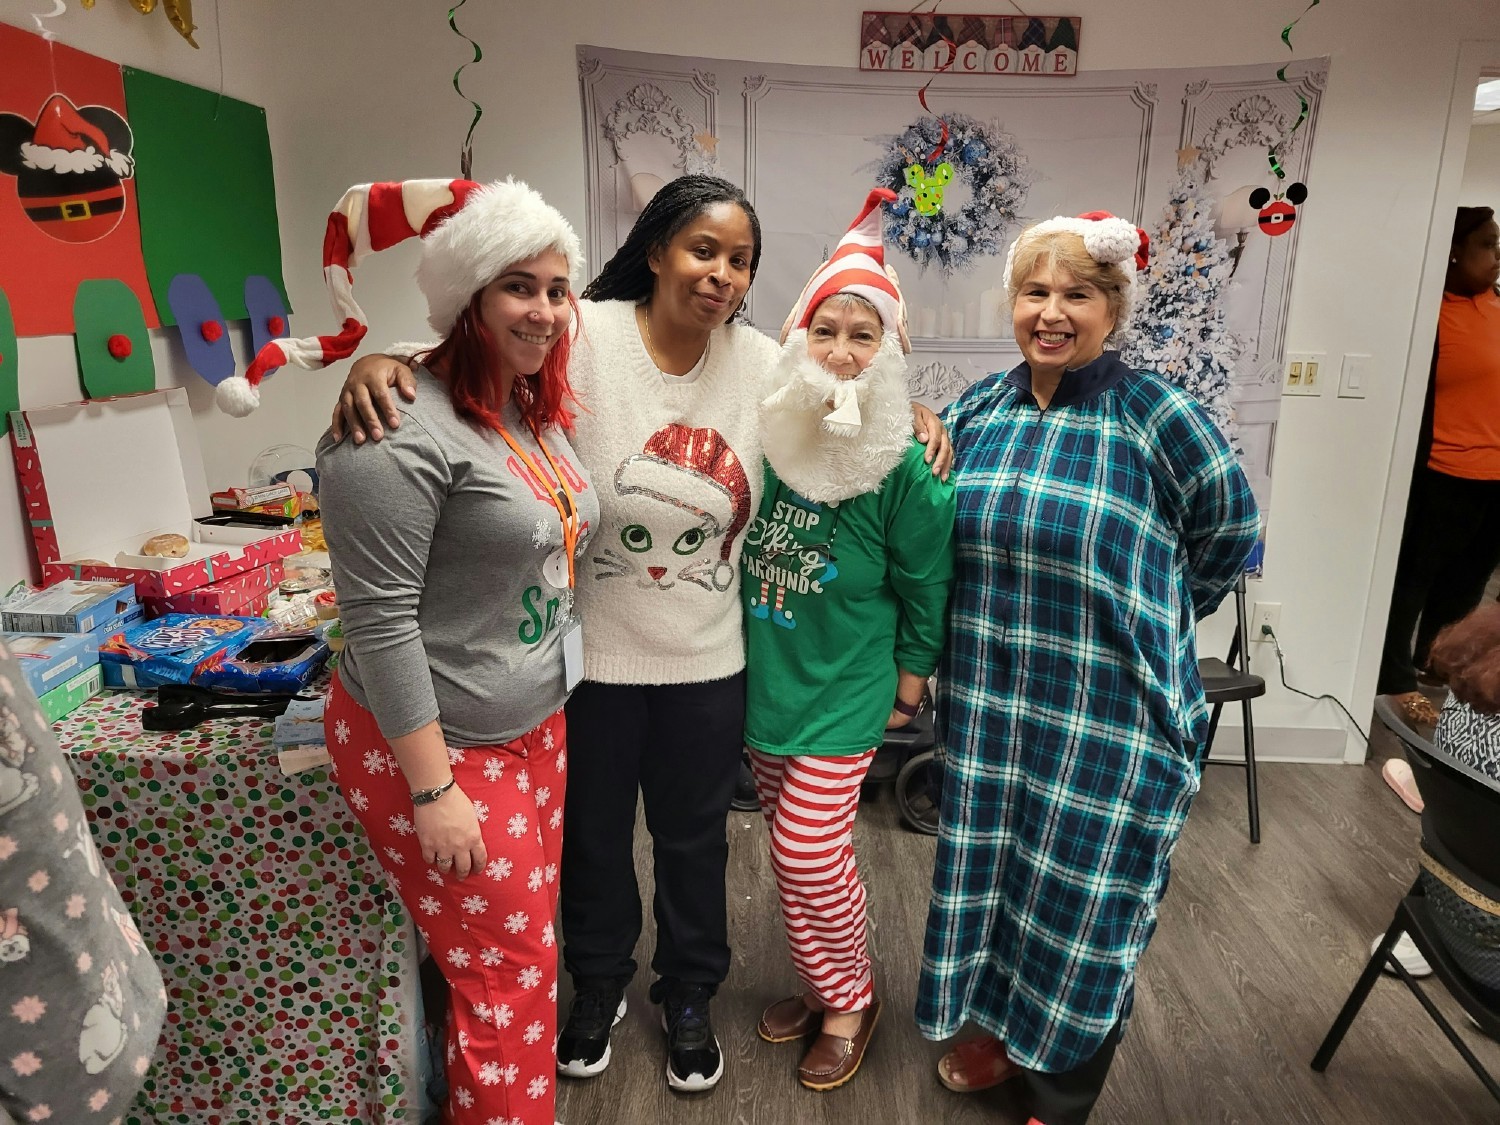 Our Miami “Parents as Teachers” team participating in the agency-wide ugly sweater competition